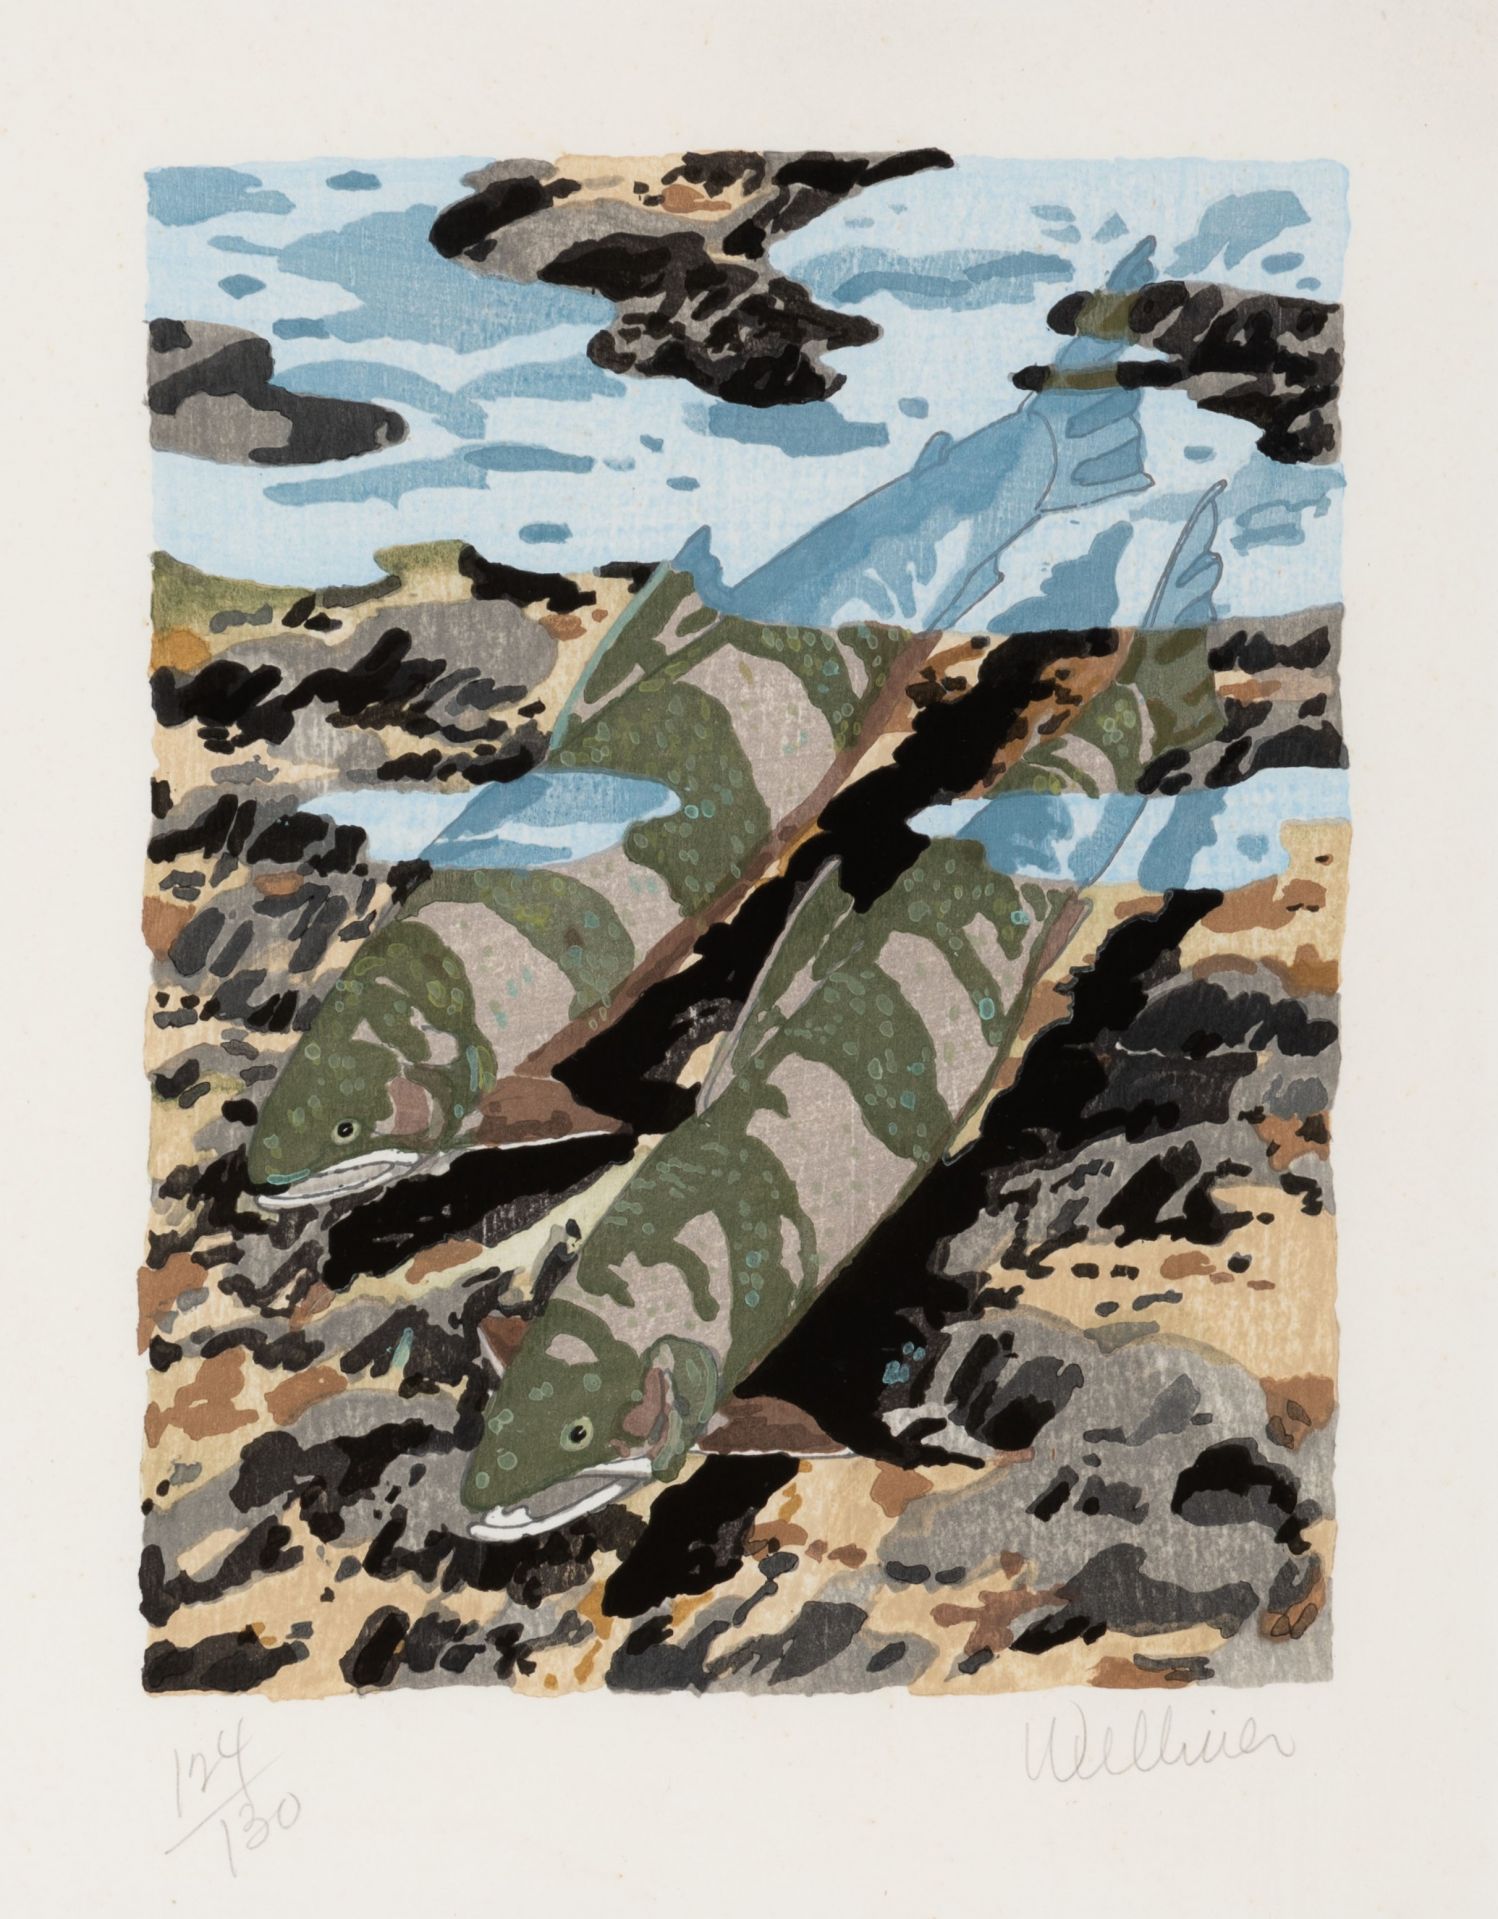 Neil Welliver, Trout, 1981, woodcut, ed. 124/130, 2020.1.50